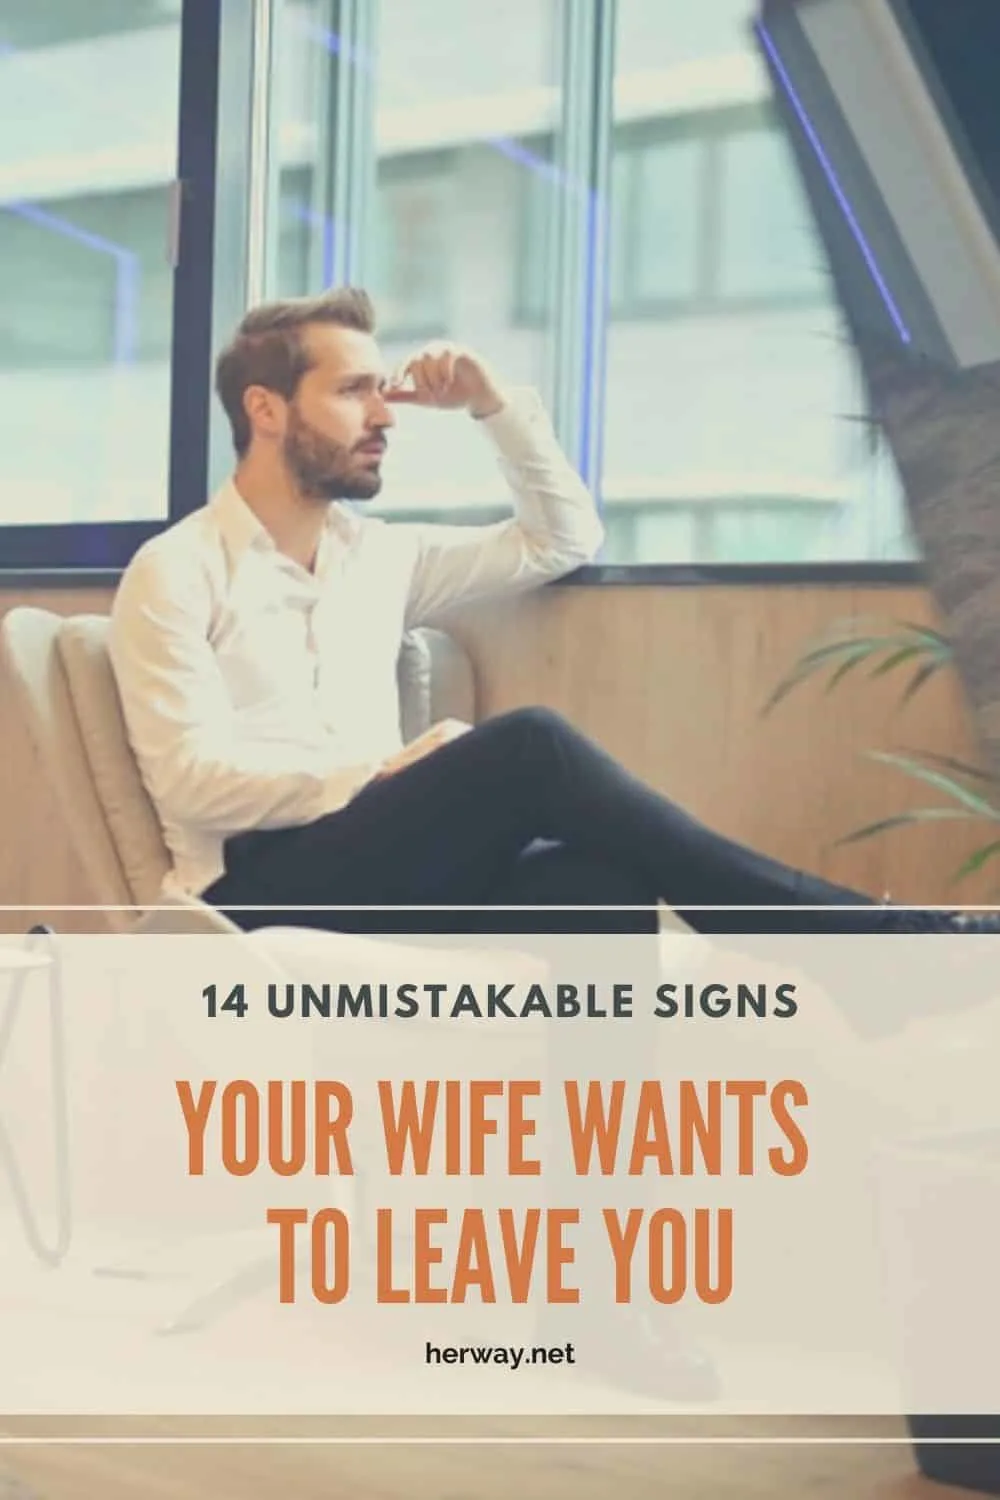 14 Unmistakable Signs Your Wife Wants To Leave You